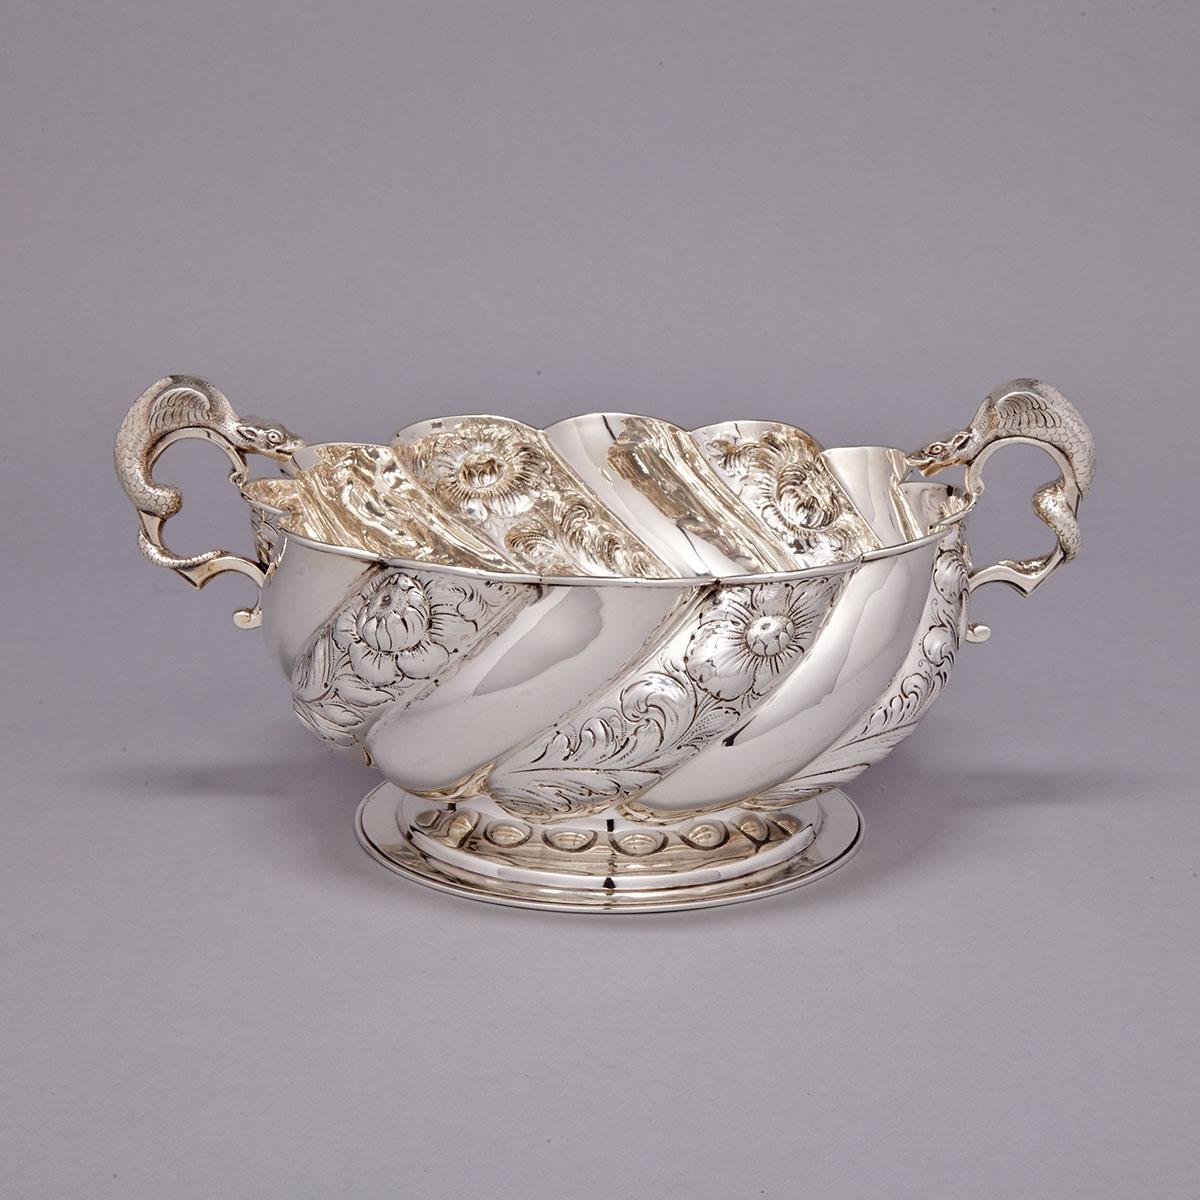 Victorian Silver Two-Handled Punch Bowl, Carrington & Co., London, 1891